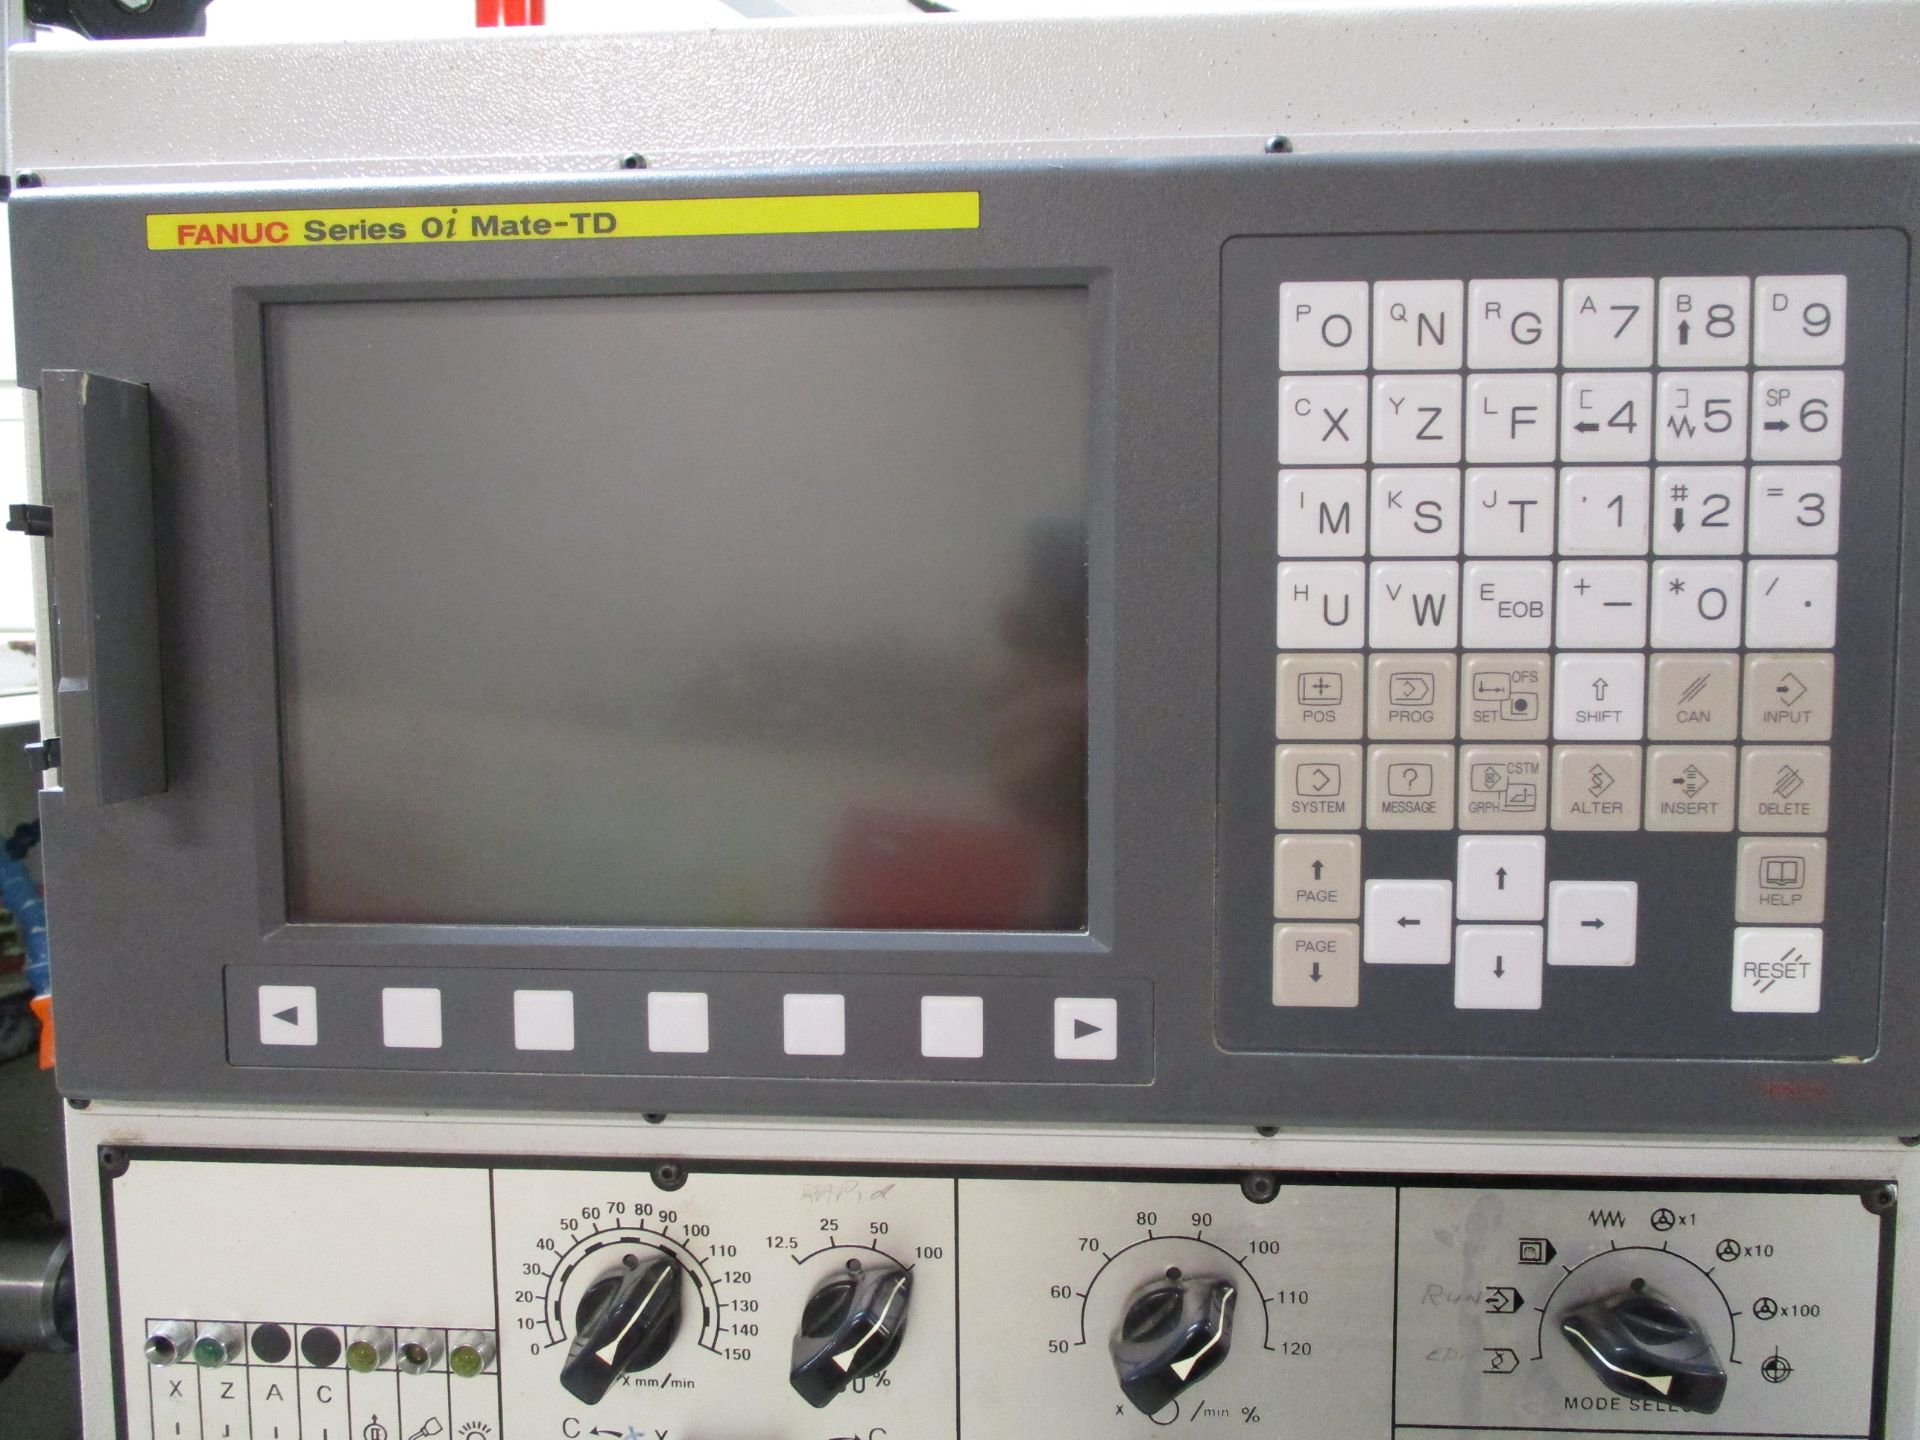 Cubic Model PLG-42L Gang Tooling CNC Lathe, SN 4202428, with Fanuc Series 0i Mate-TD CNC Control, - Image 4 of 13